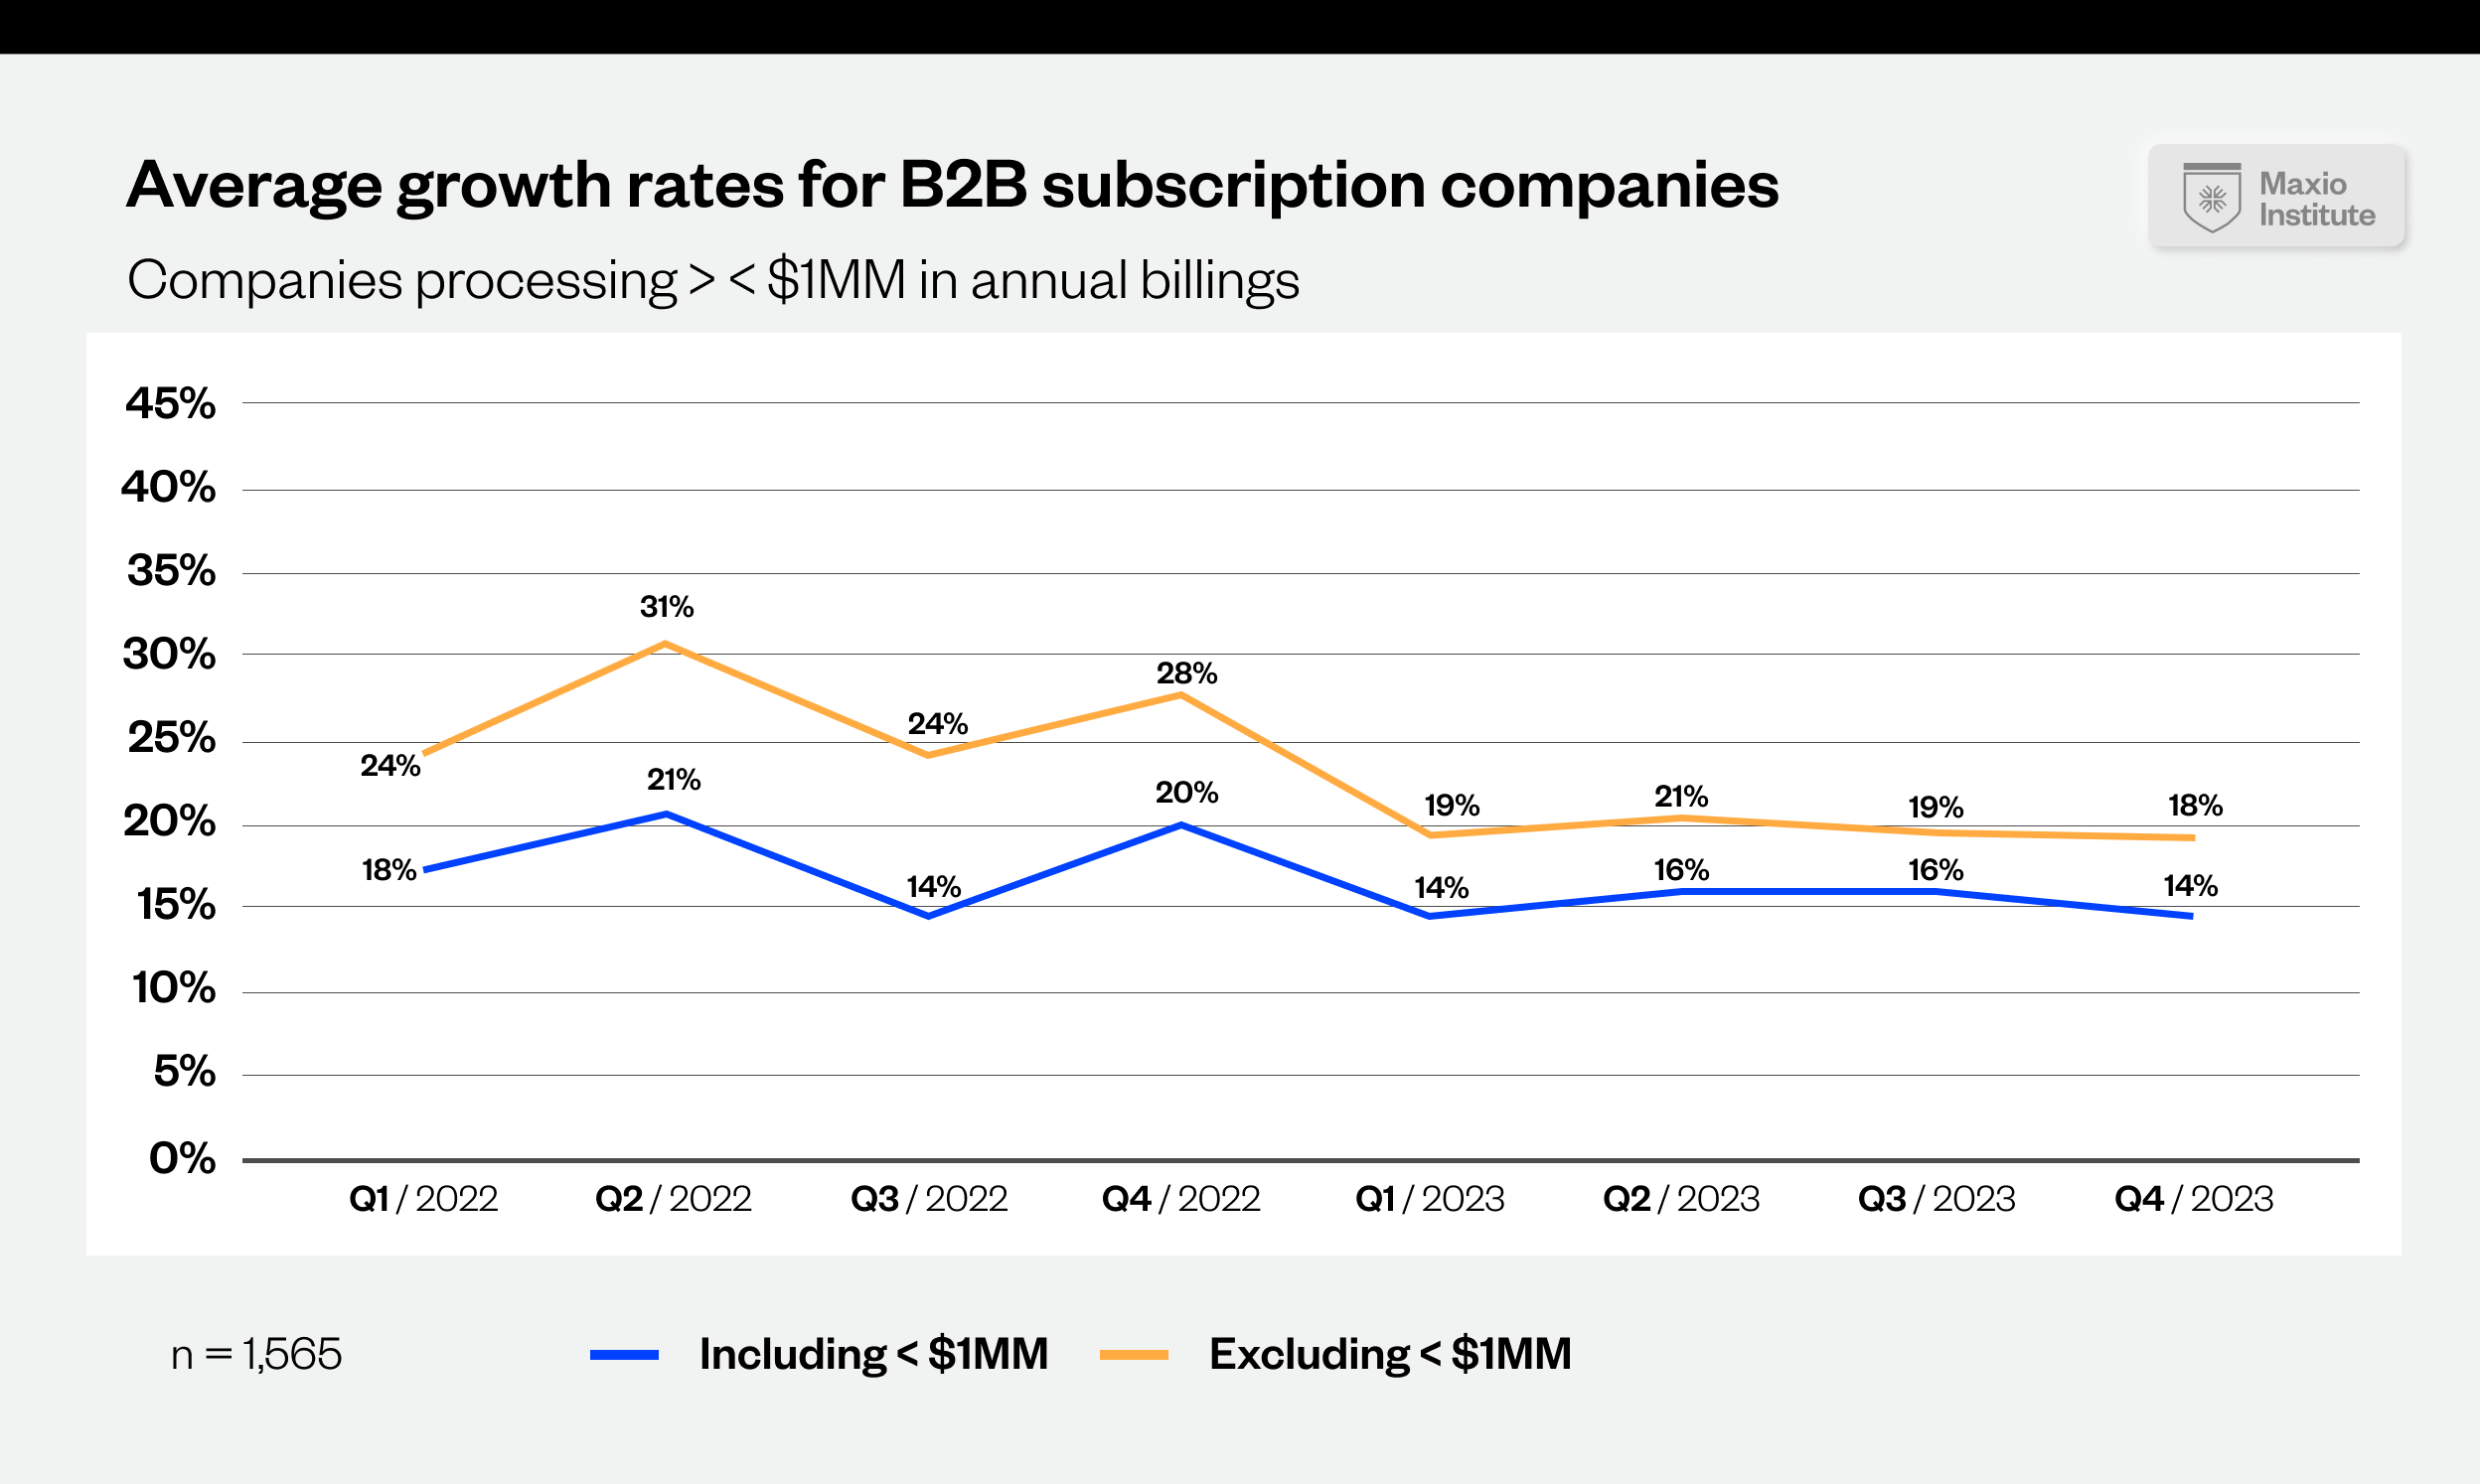 A chart showing the growth rates for B2B subscription companies processing ><$1MM in annual billings